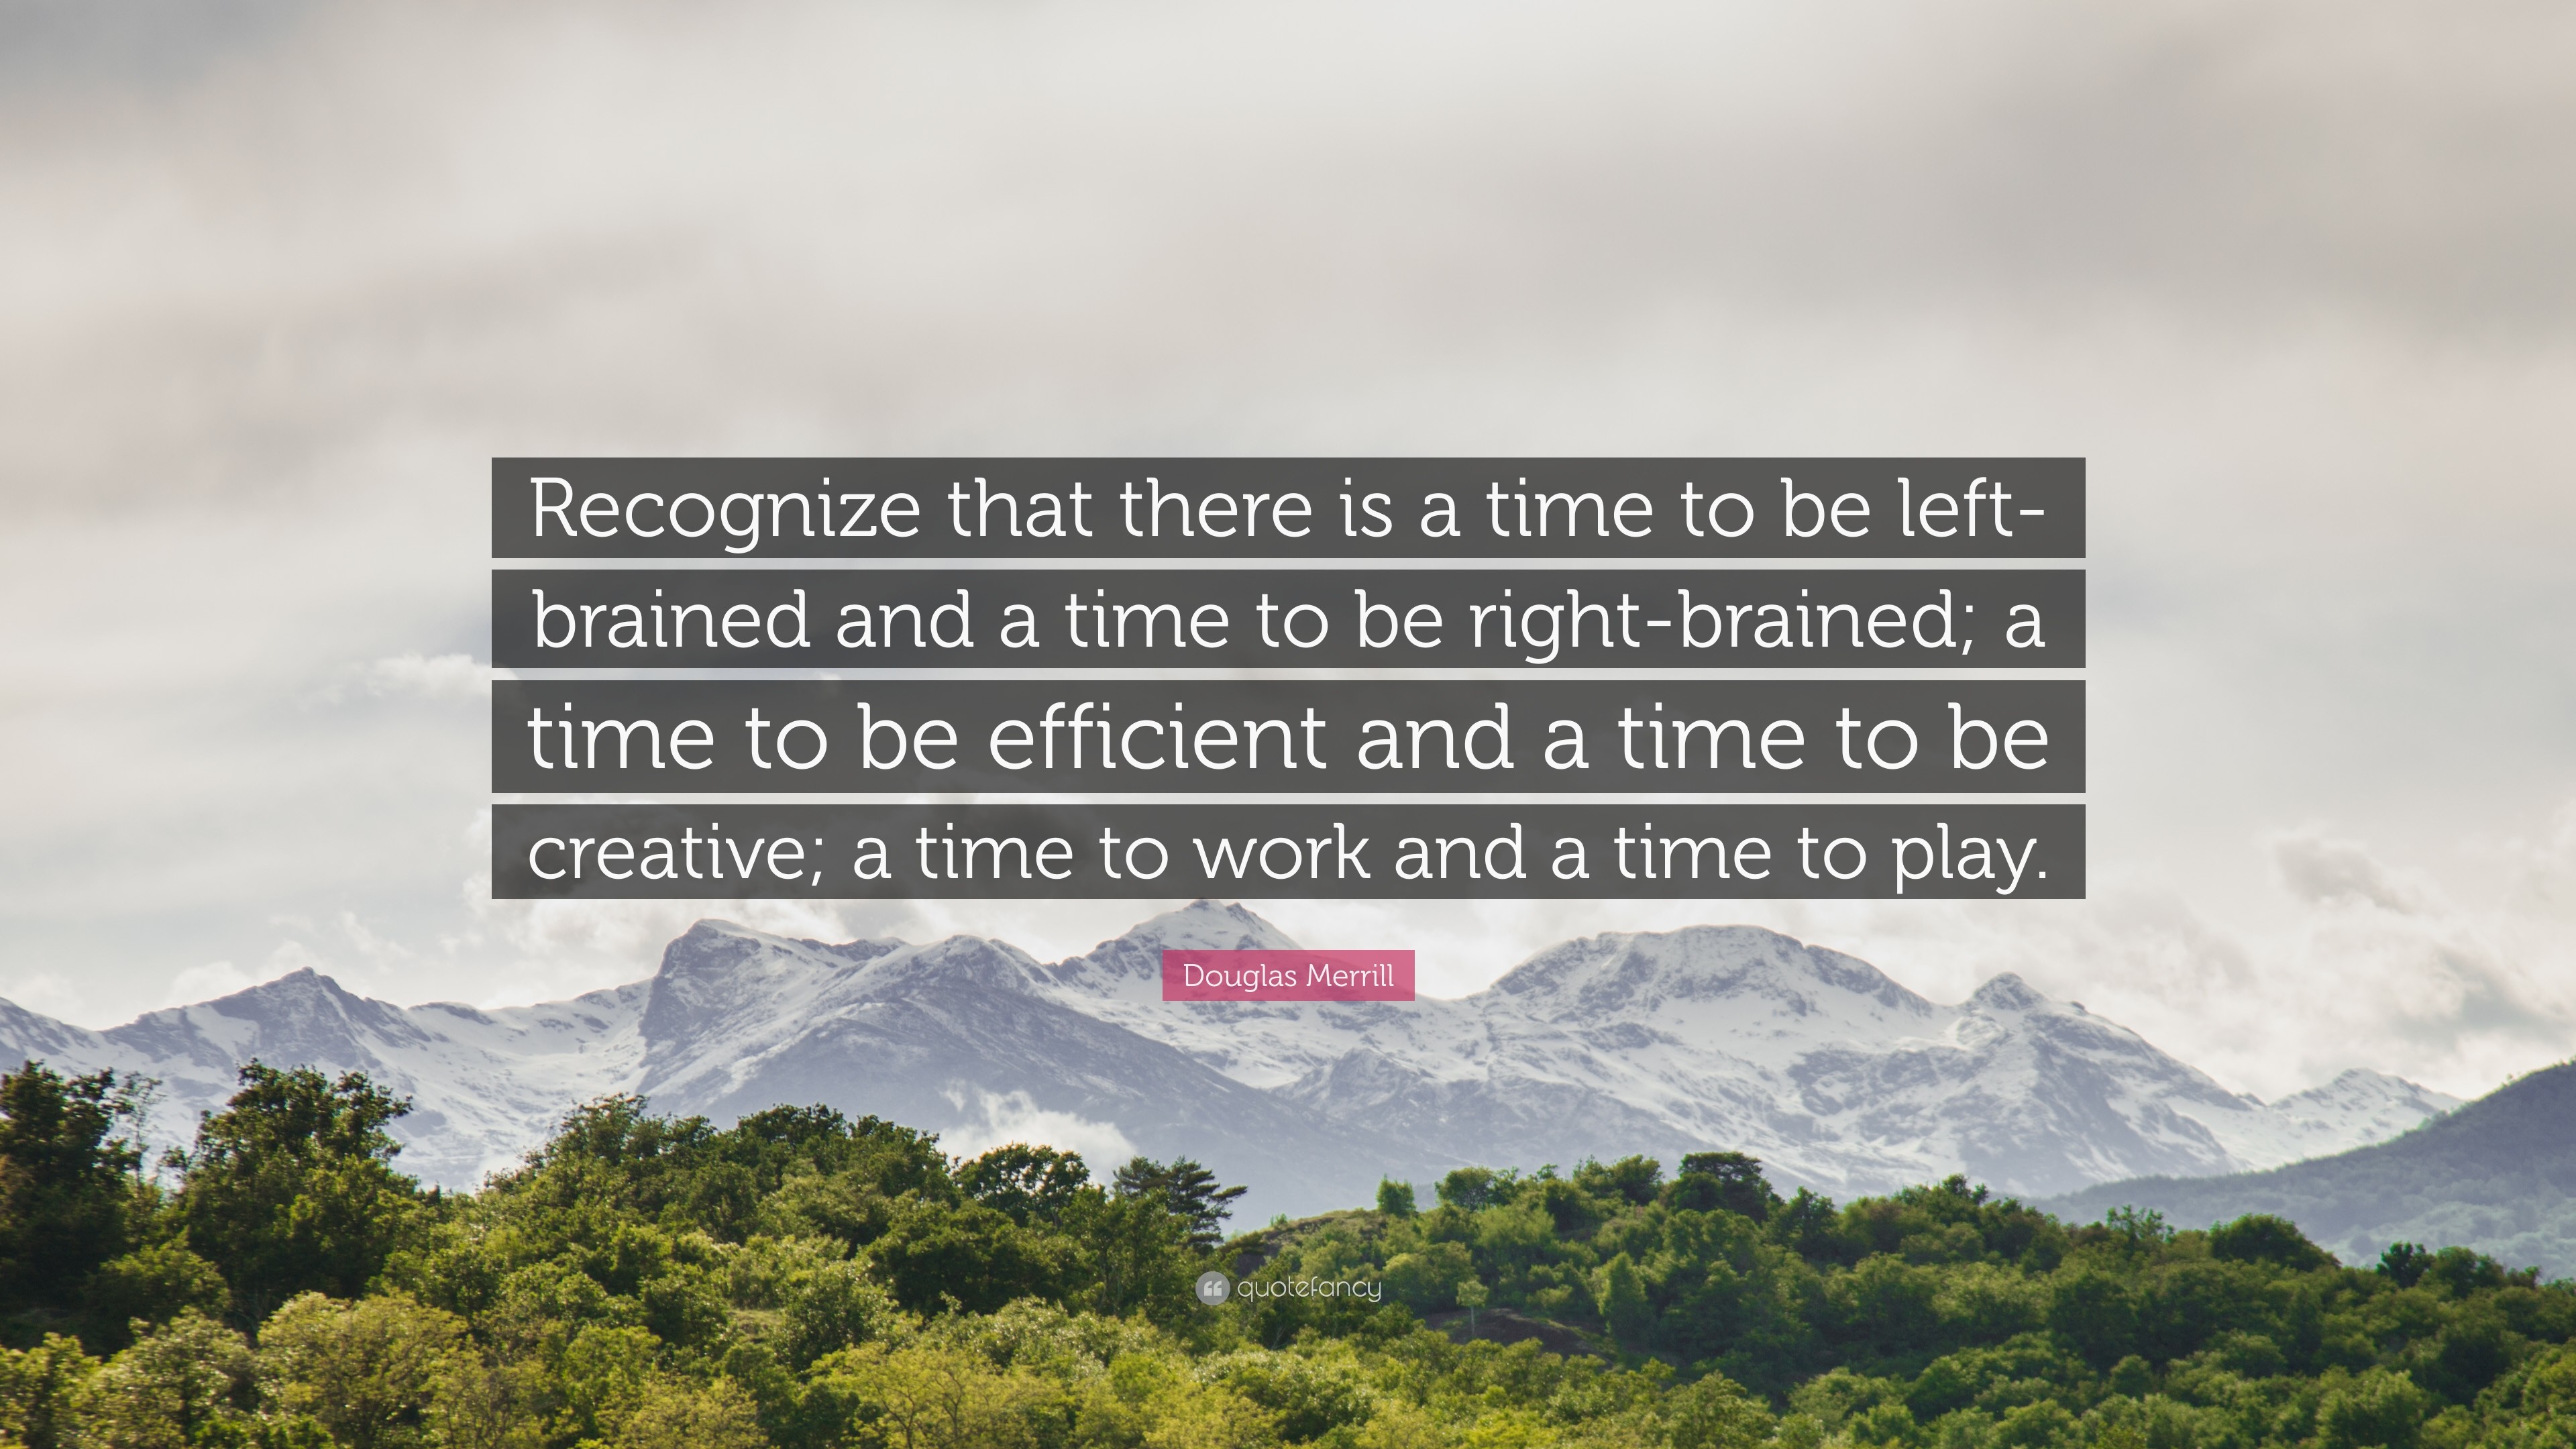 3840x2160 Douglas Merrill Quote: “Recognize that there is a time to be left-brained